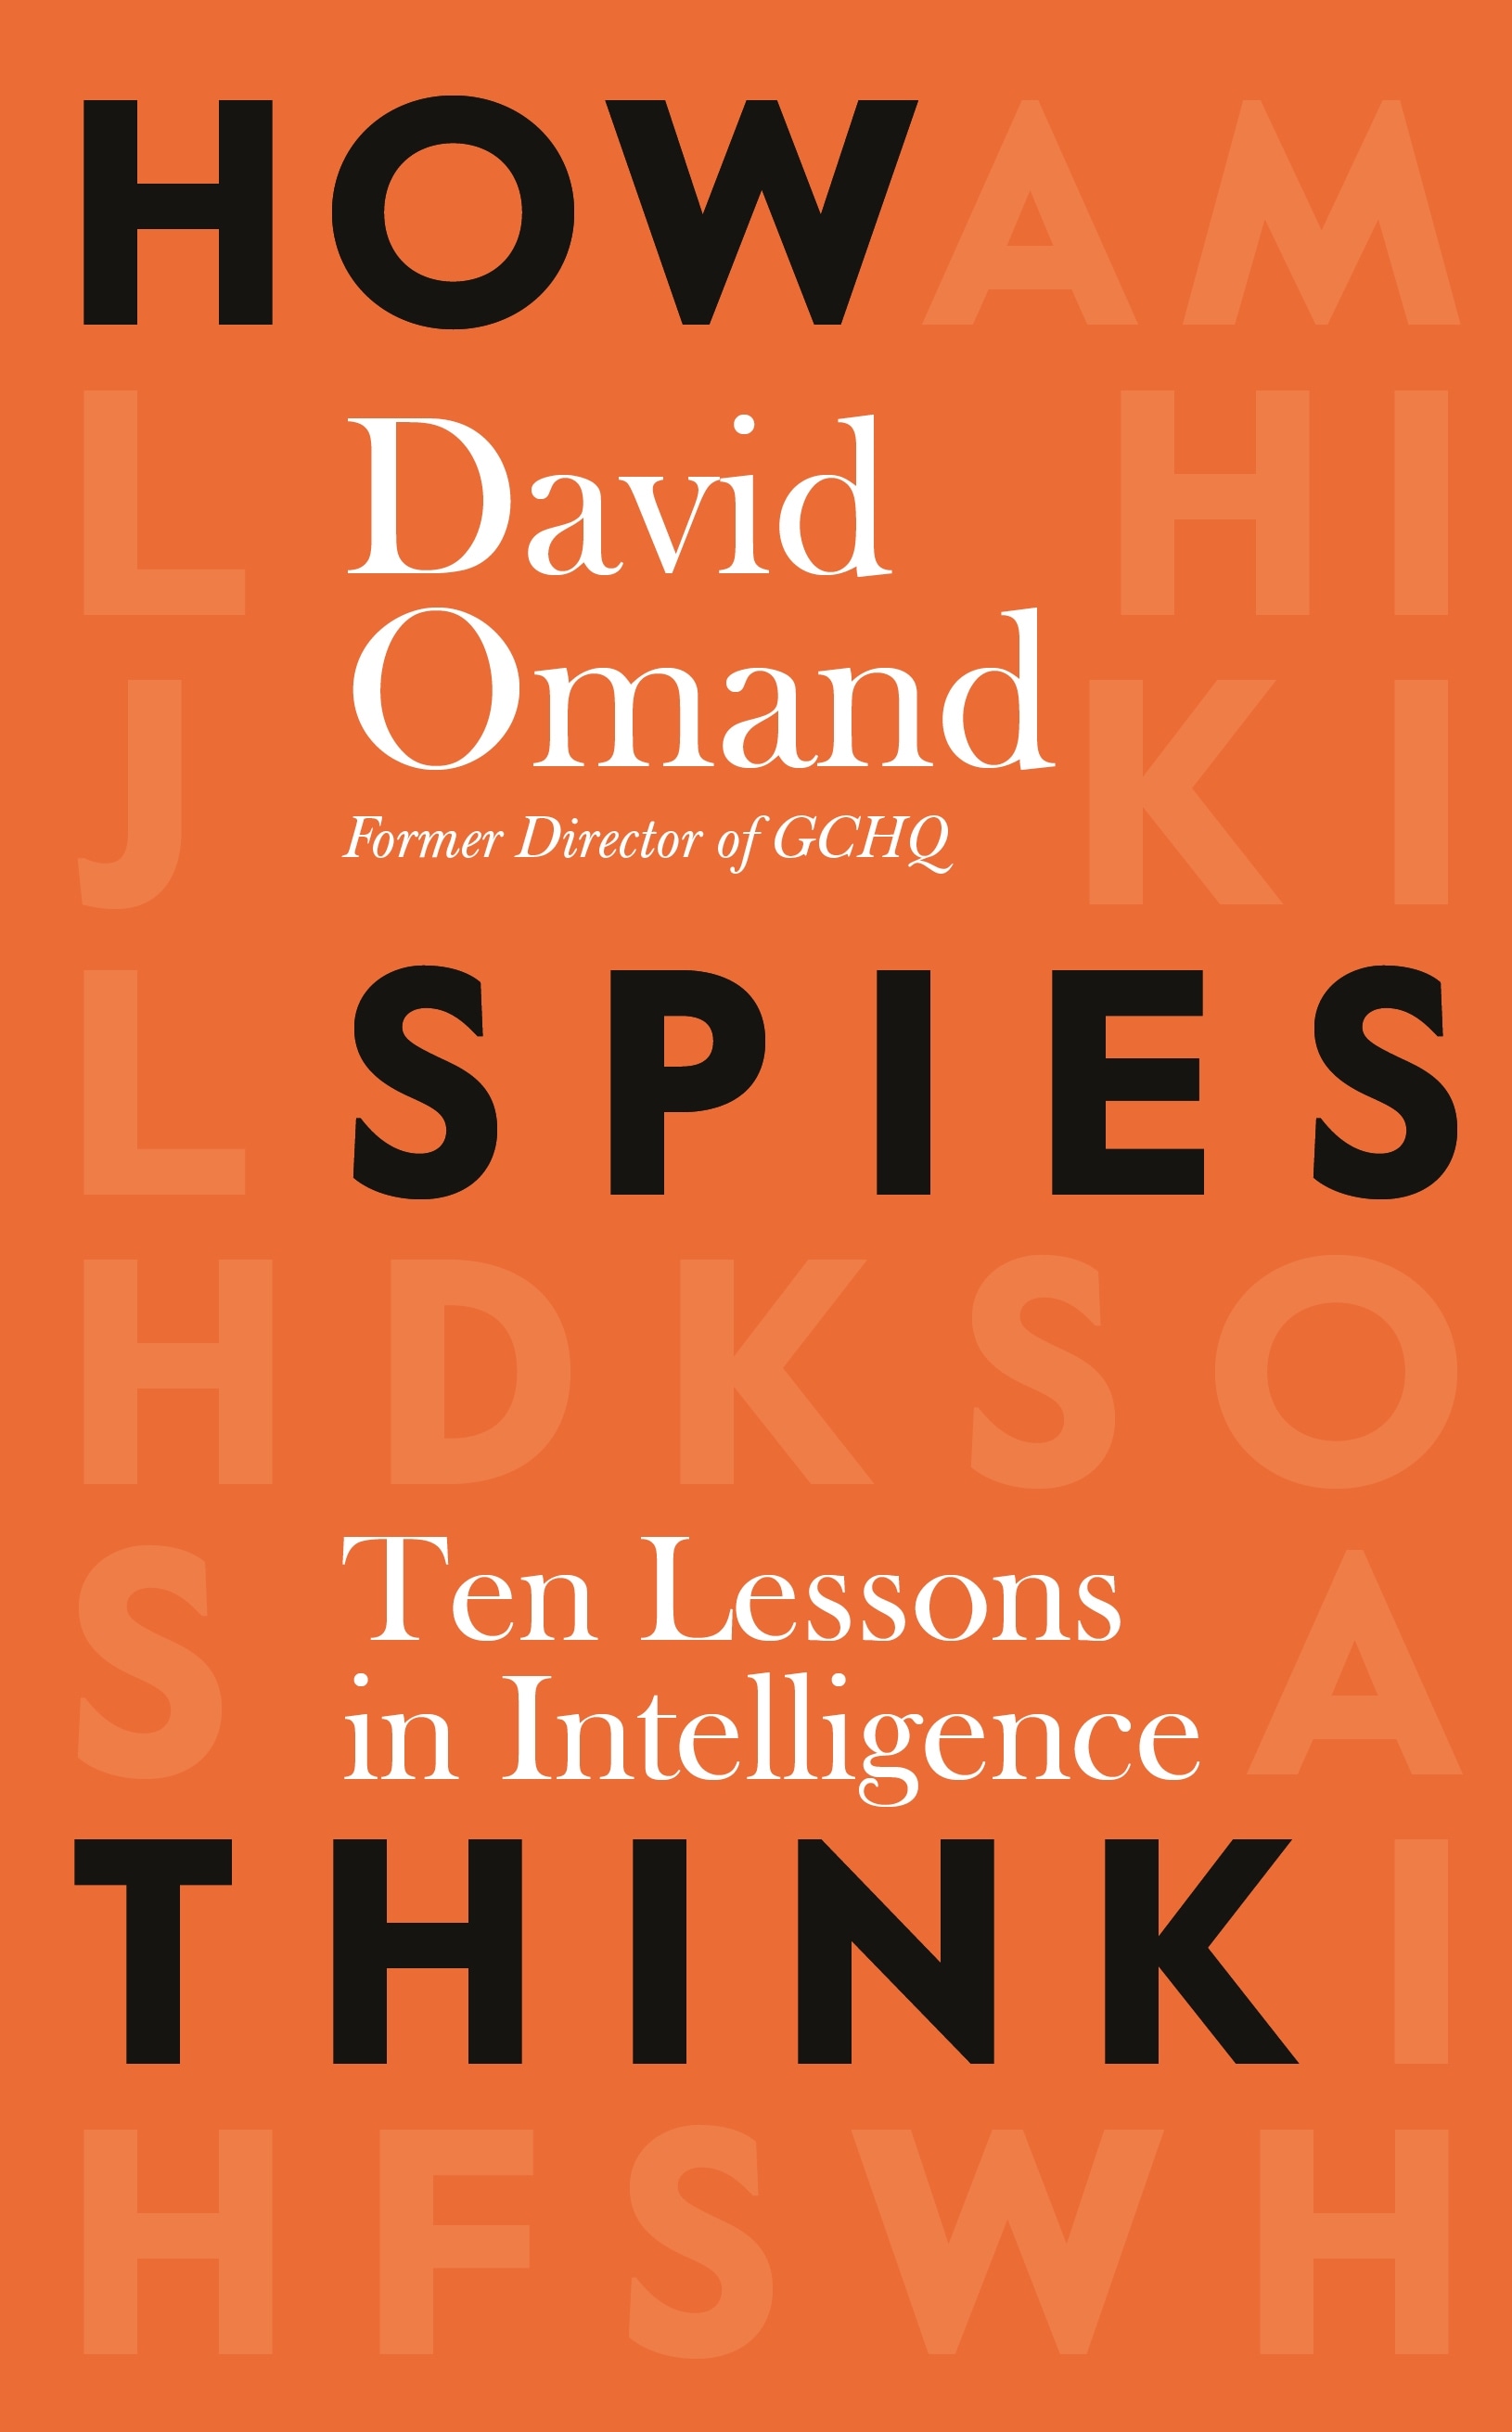 Book “How Spies Think” by David Omand — October 29, 2020